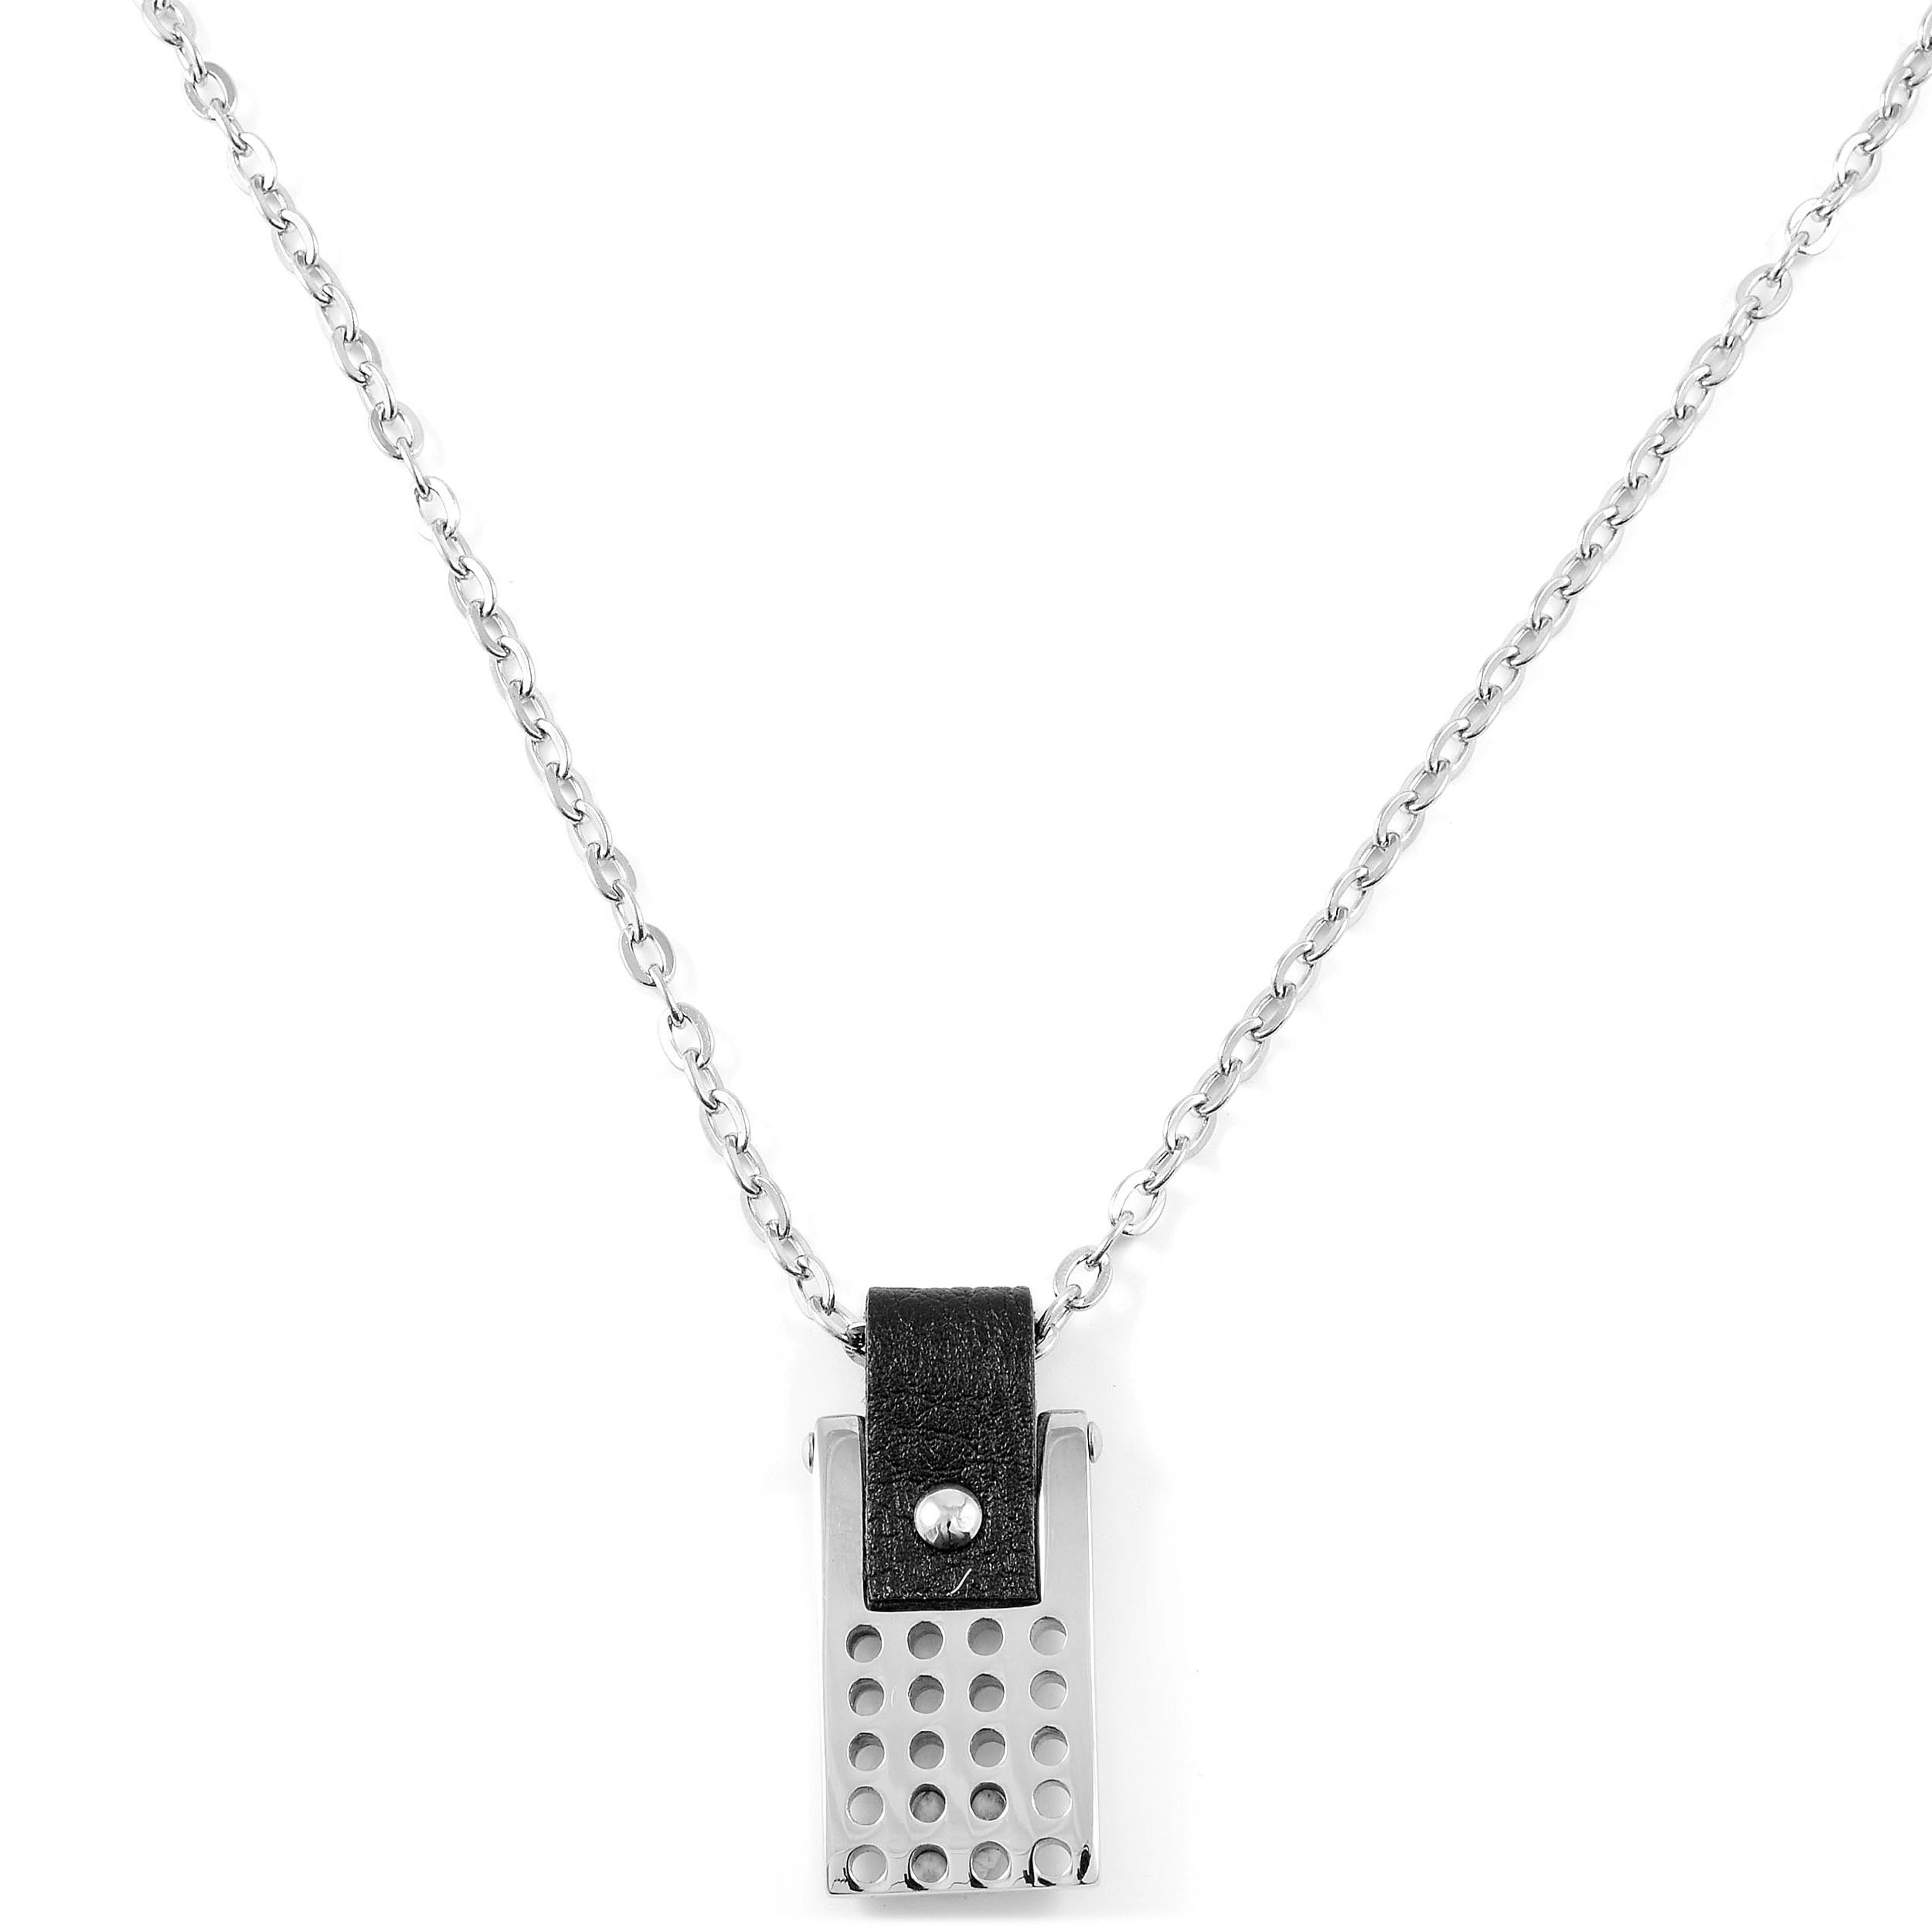 Silver-Tone & Black Stainless Steel Plate Cable Chain Necklace